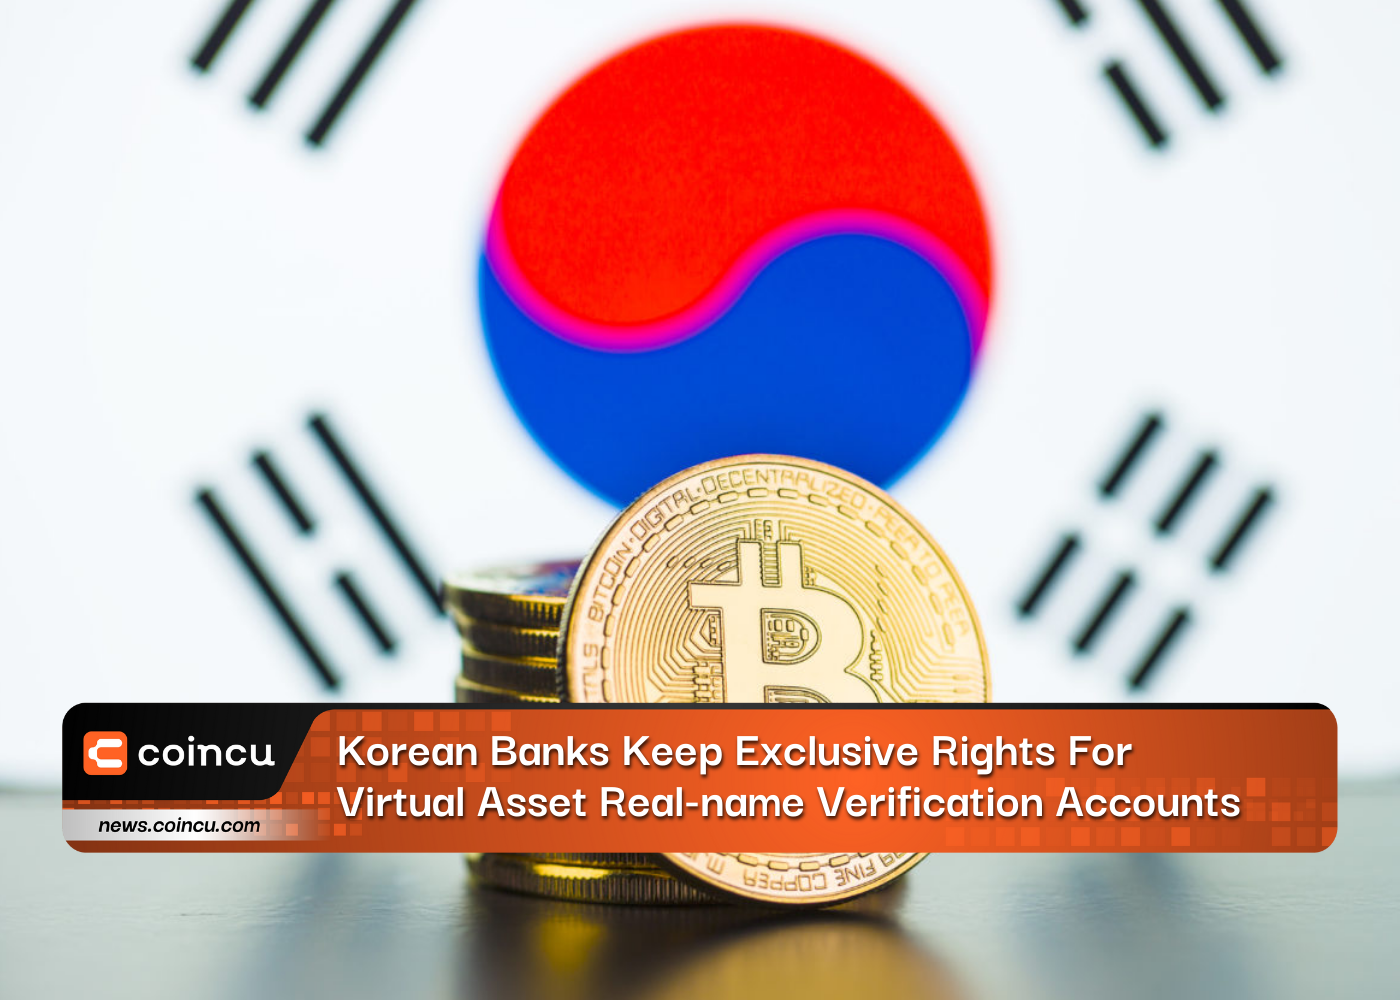 Korean Banks Keep Exclusive Rights For Virtual Asset Real-name Verification Accounts